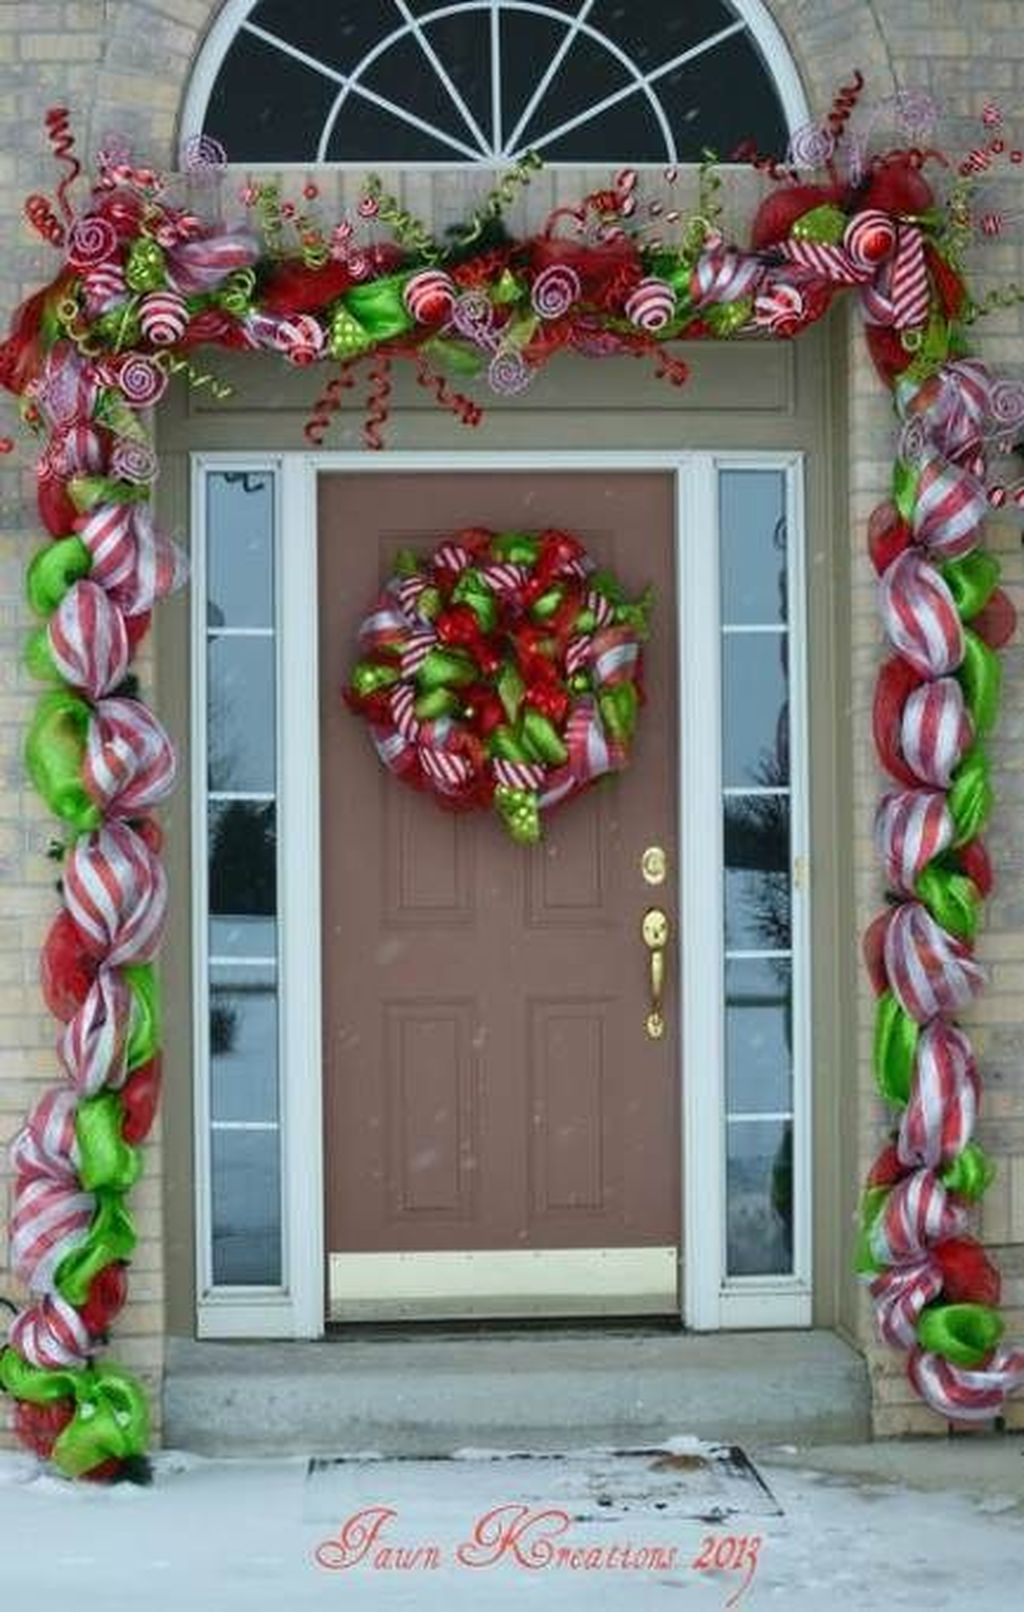 The Best Christmas Front Door Decorations Ideas 24 - MAGZHOUSE